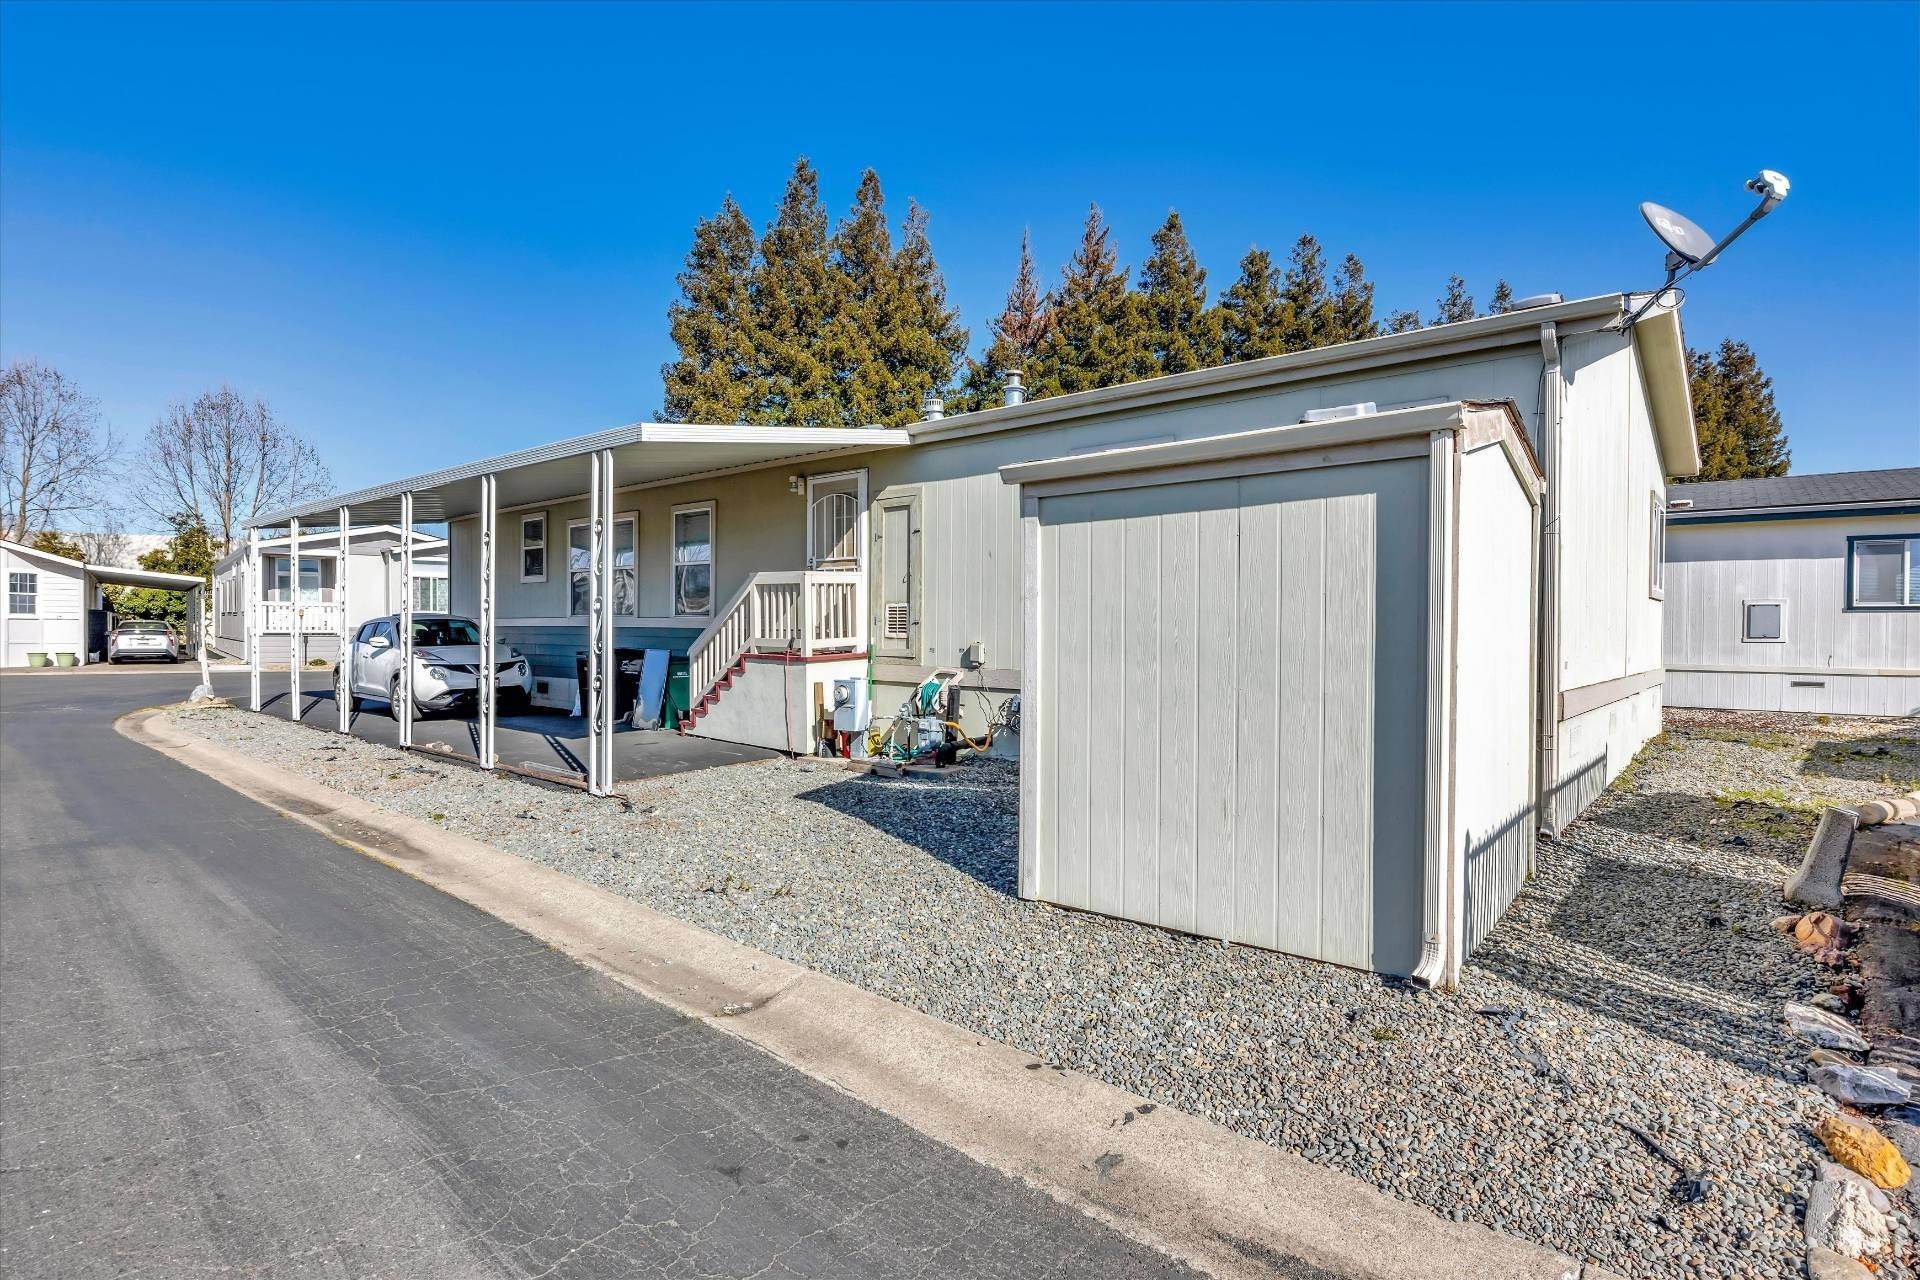 28. Mobile Home for Sale at Hayward, CA 94545